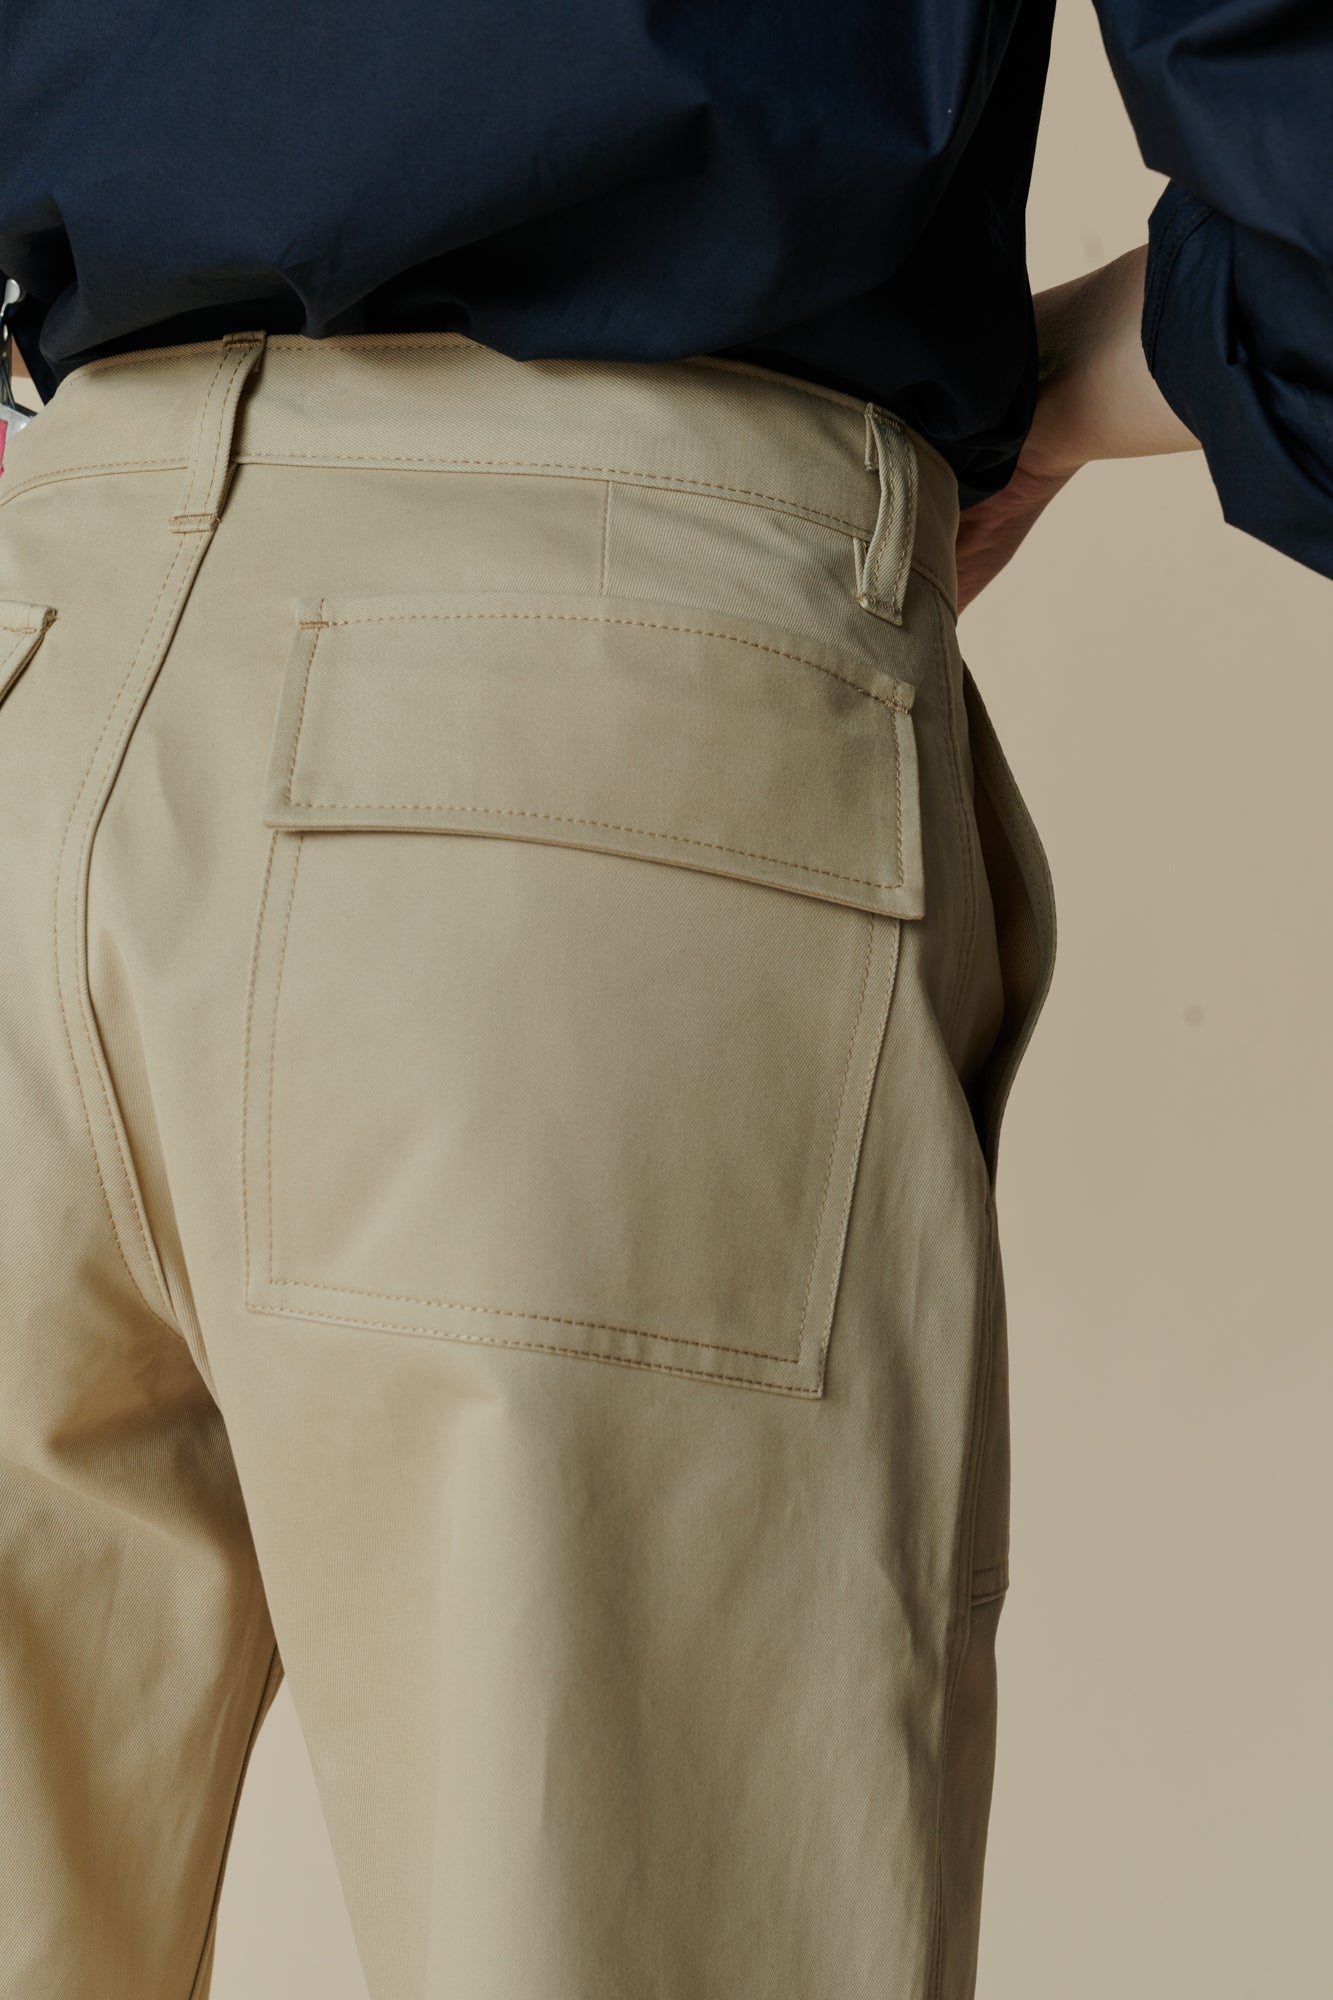 Premier Combat Trousers with Extra Reinforcement - OPGear